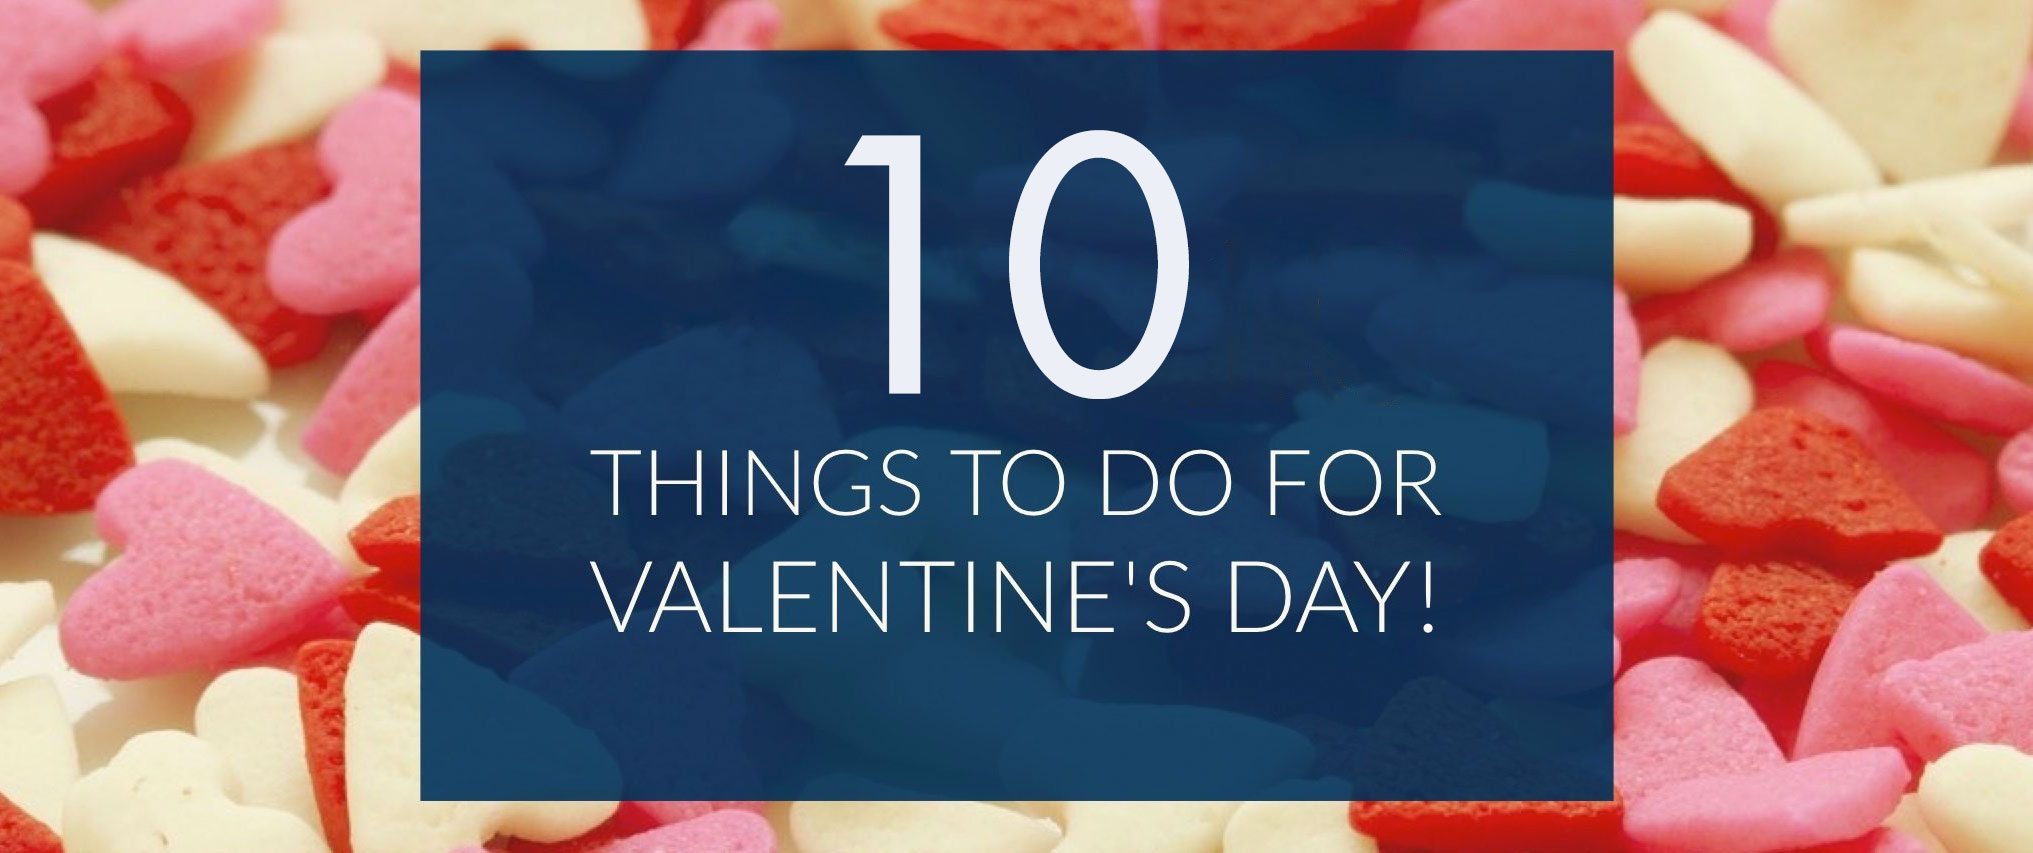 10 Things To Do For Valentine's Day - Charlotte Home Finder2033 x 853